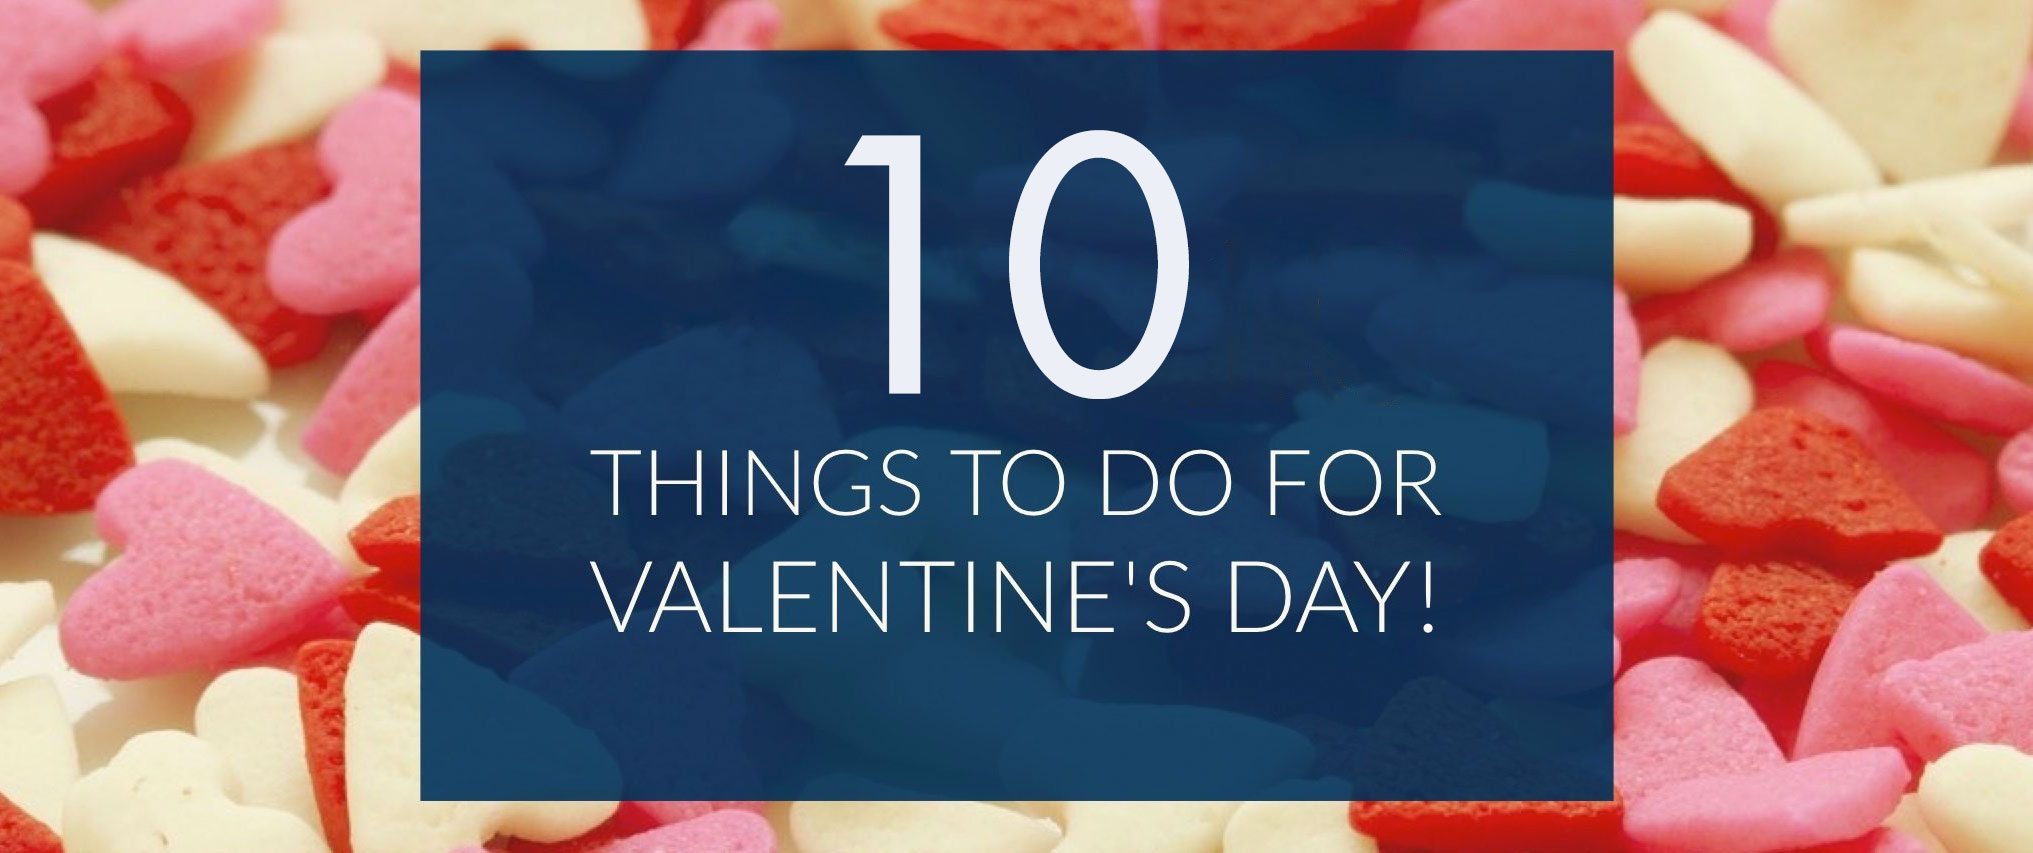 10 Things To Do For Valentine's Day - Charlotte Home Finder2033 x 853